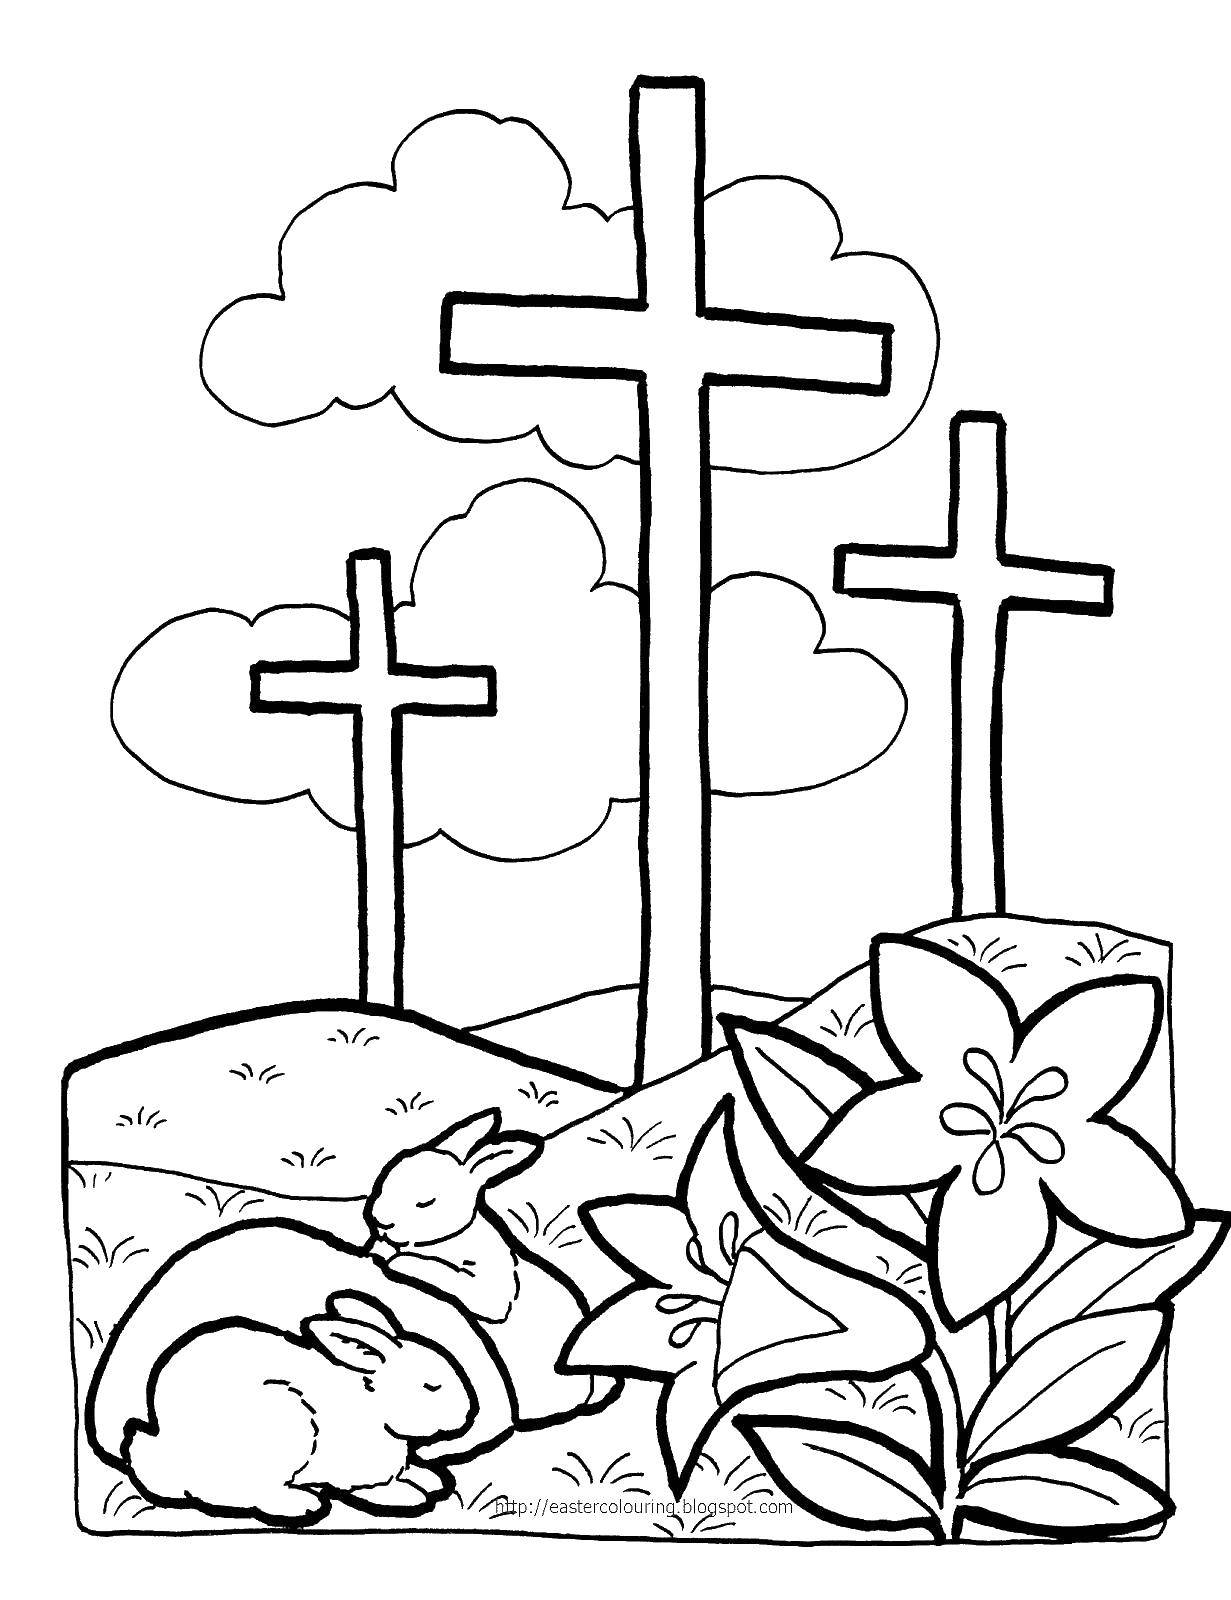 Coloring Siatki from crosses. Category coloring pages cross. Tags:  Cross.